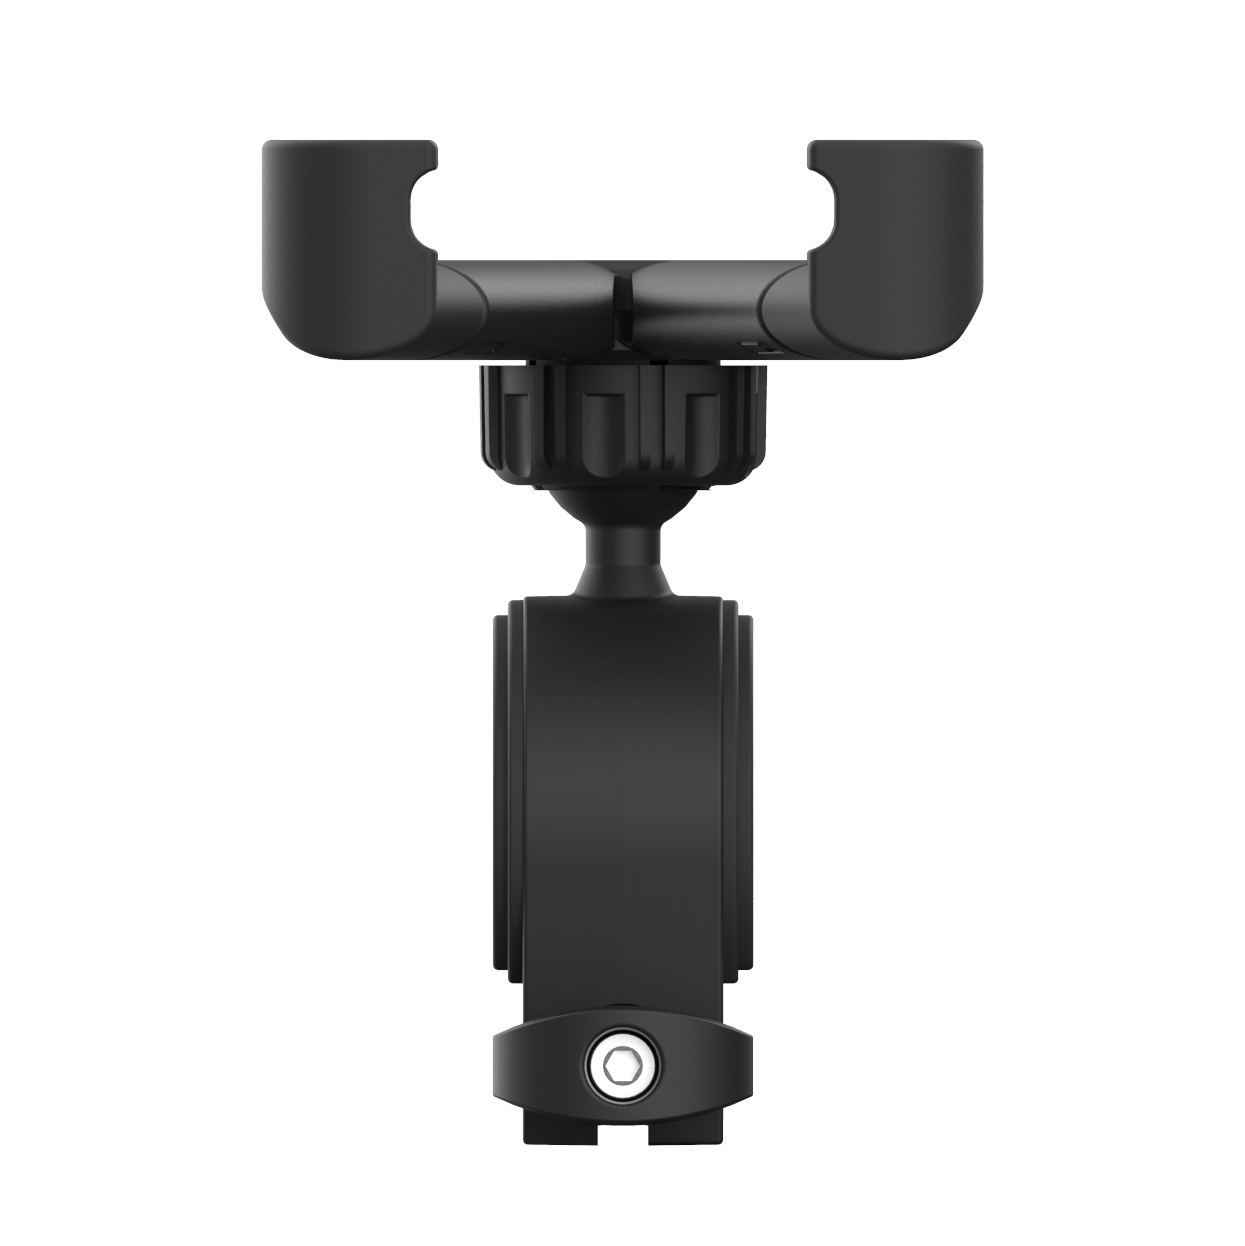 Ninebot-KickScooter-phone-holder-Product-picture.png